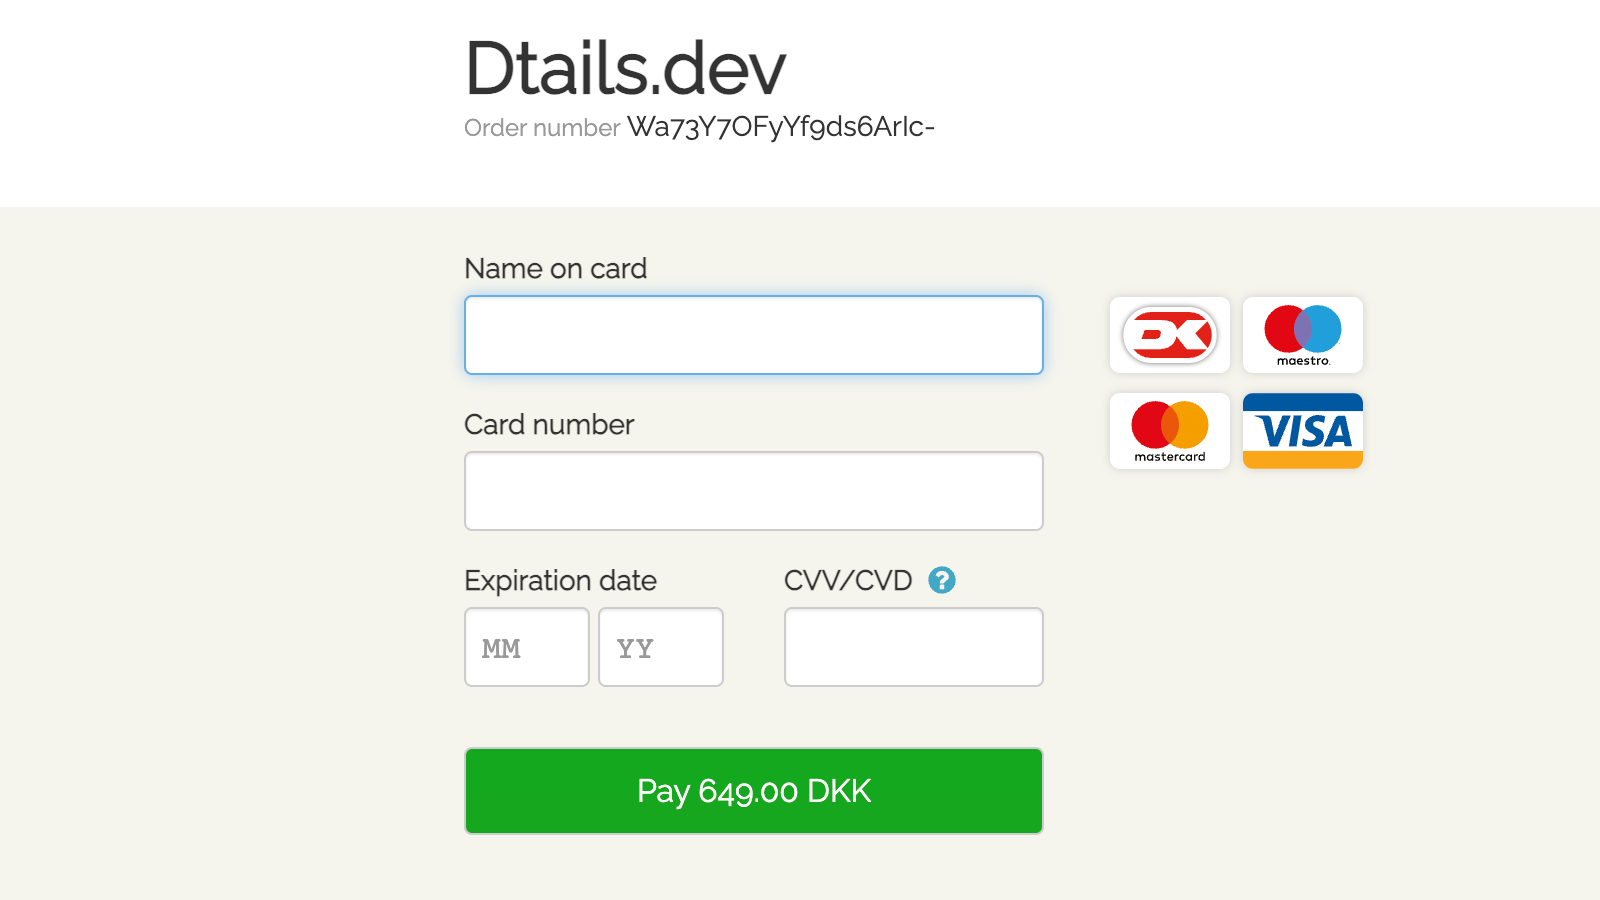 Payment page for entering payment details